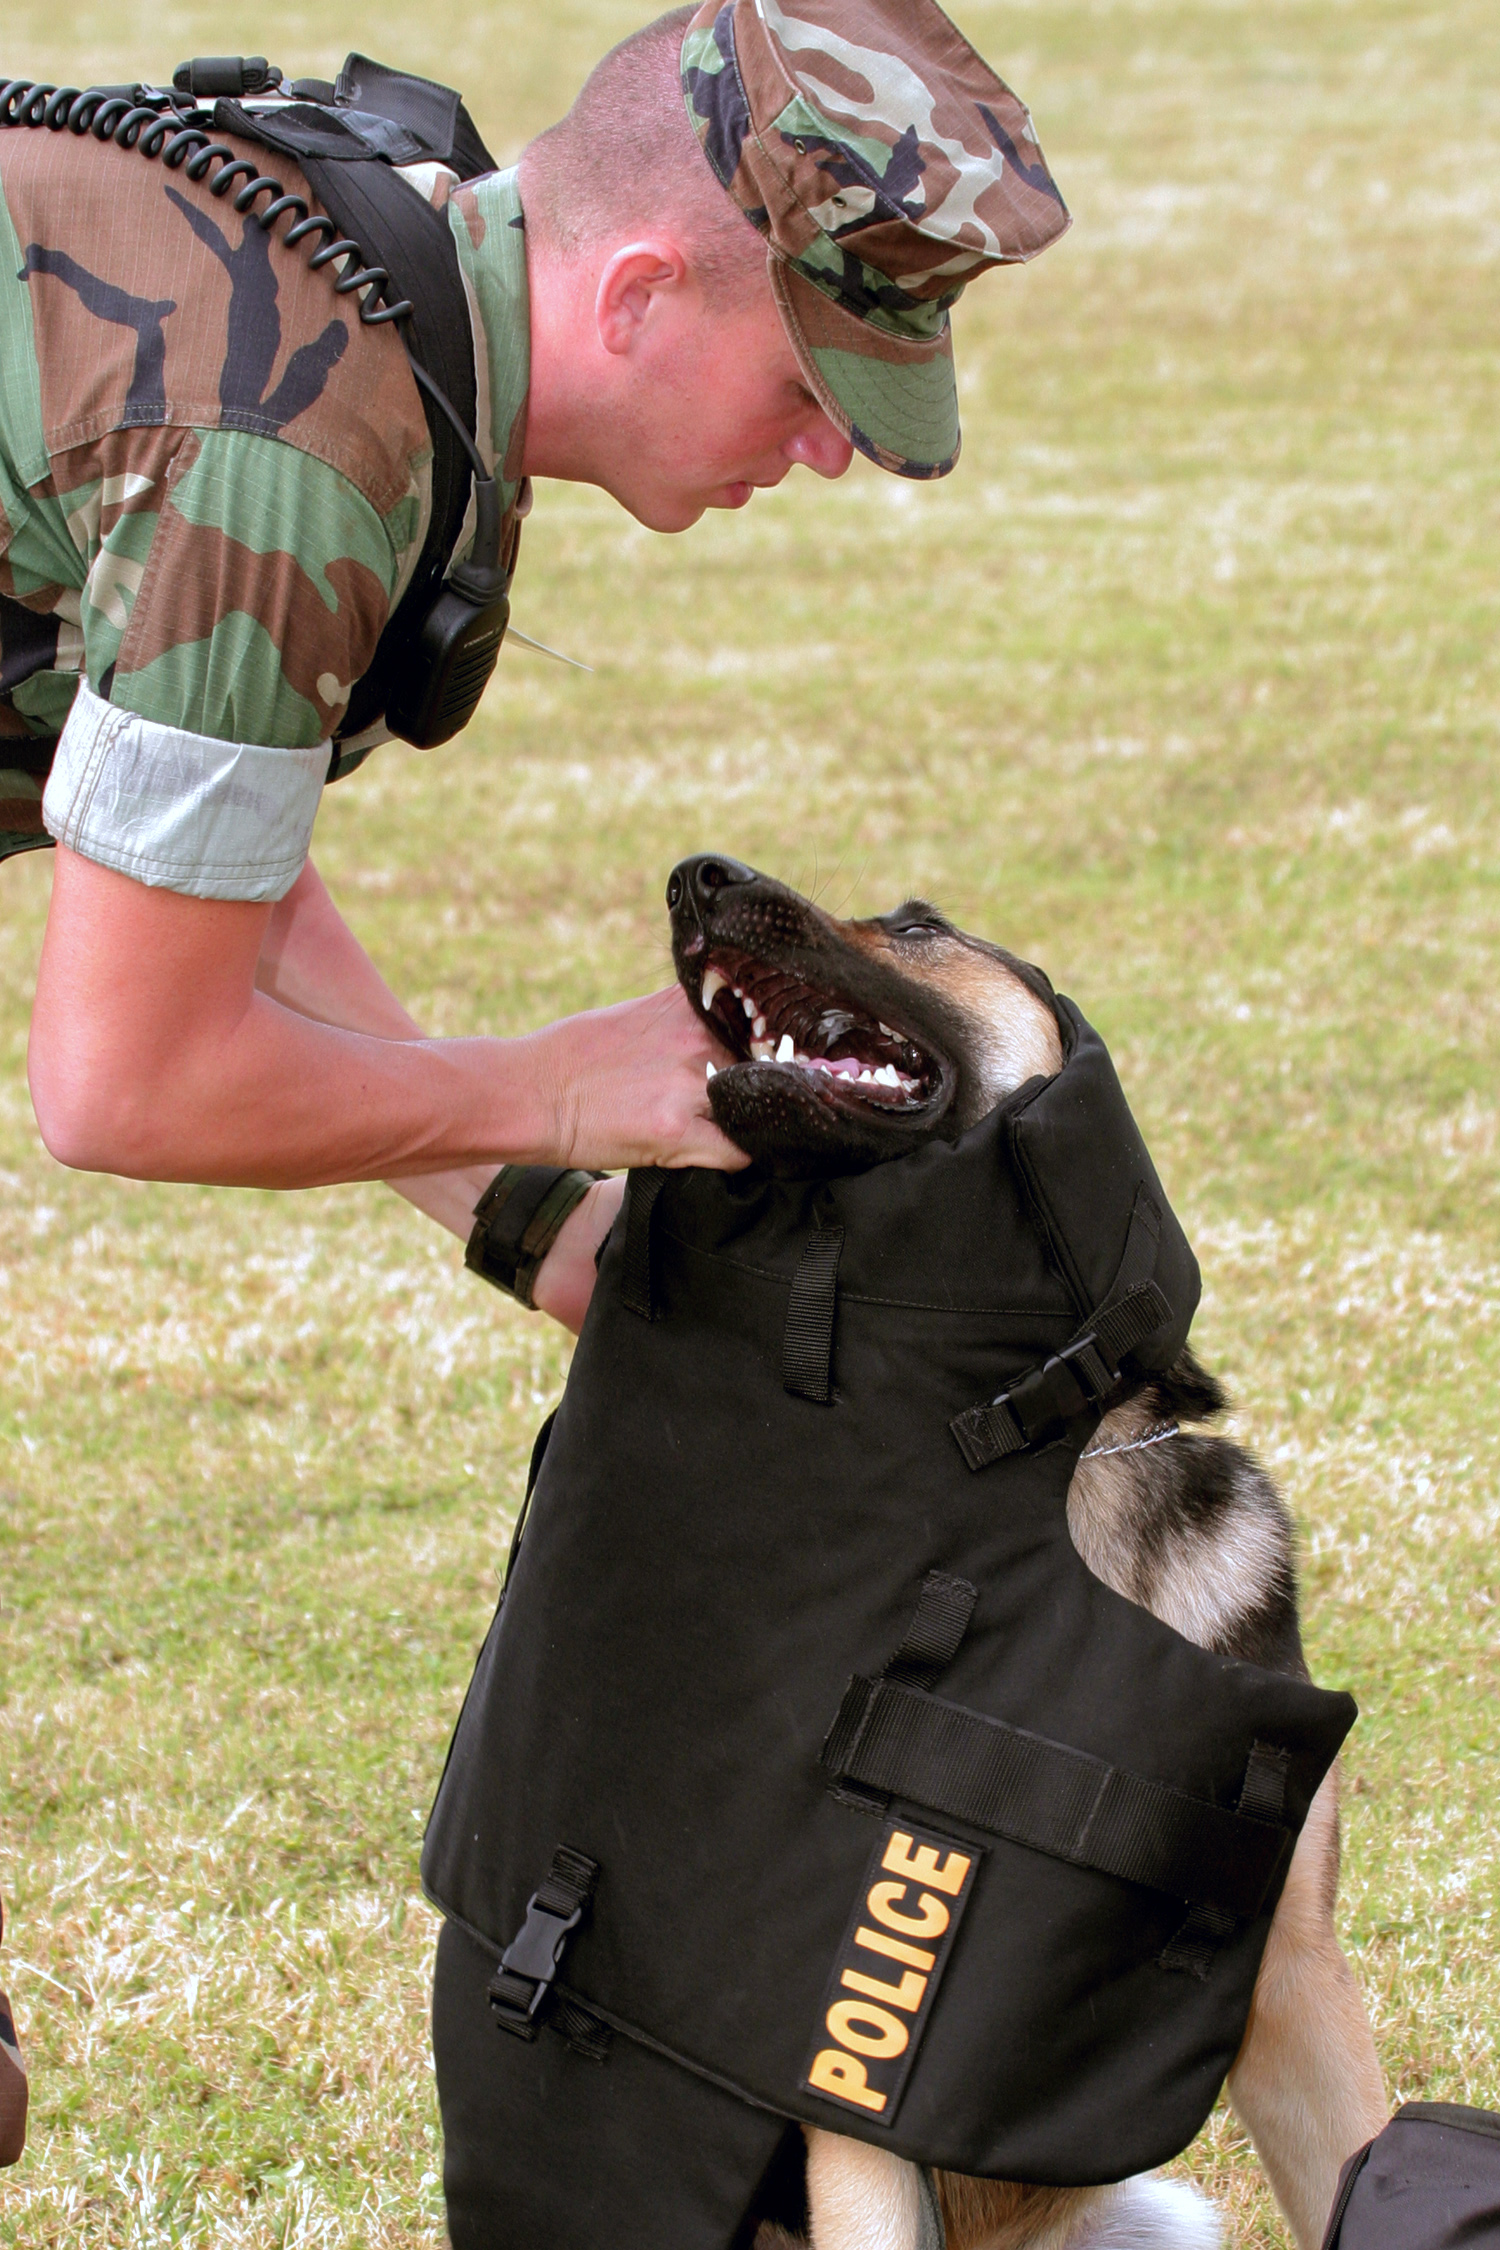 US Navy 040329-N-3228G-013 Master-at-Arms 3rd Class Eliot Fiaschi dresses ^ldquo,Arpi^rdquo, a German Shepard Military Working Dog (MWD) in body armor prior to a demonstration